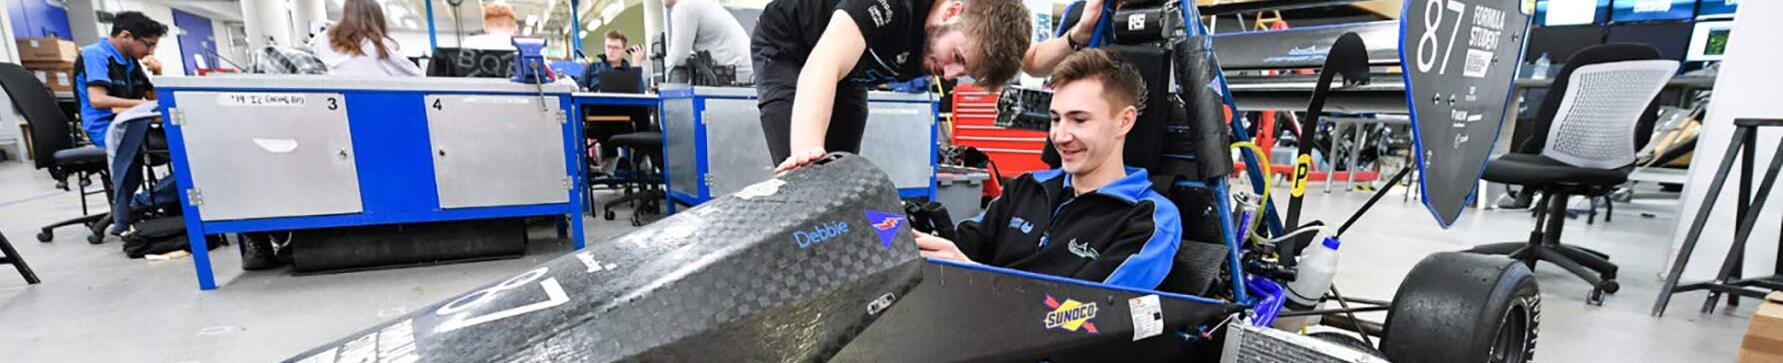 Smiling student sitting in motorsport car with another student looking on